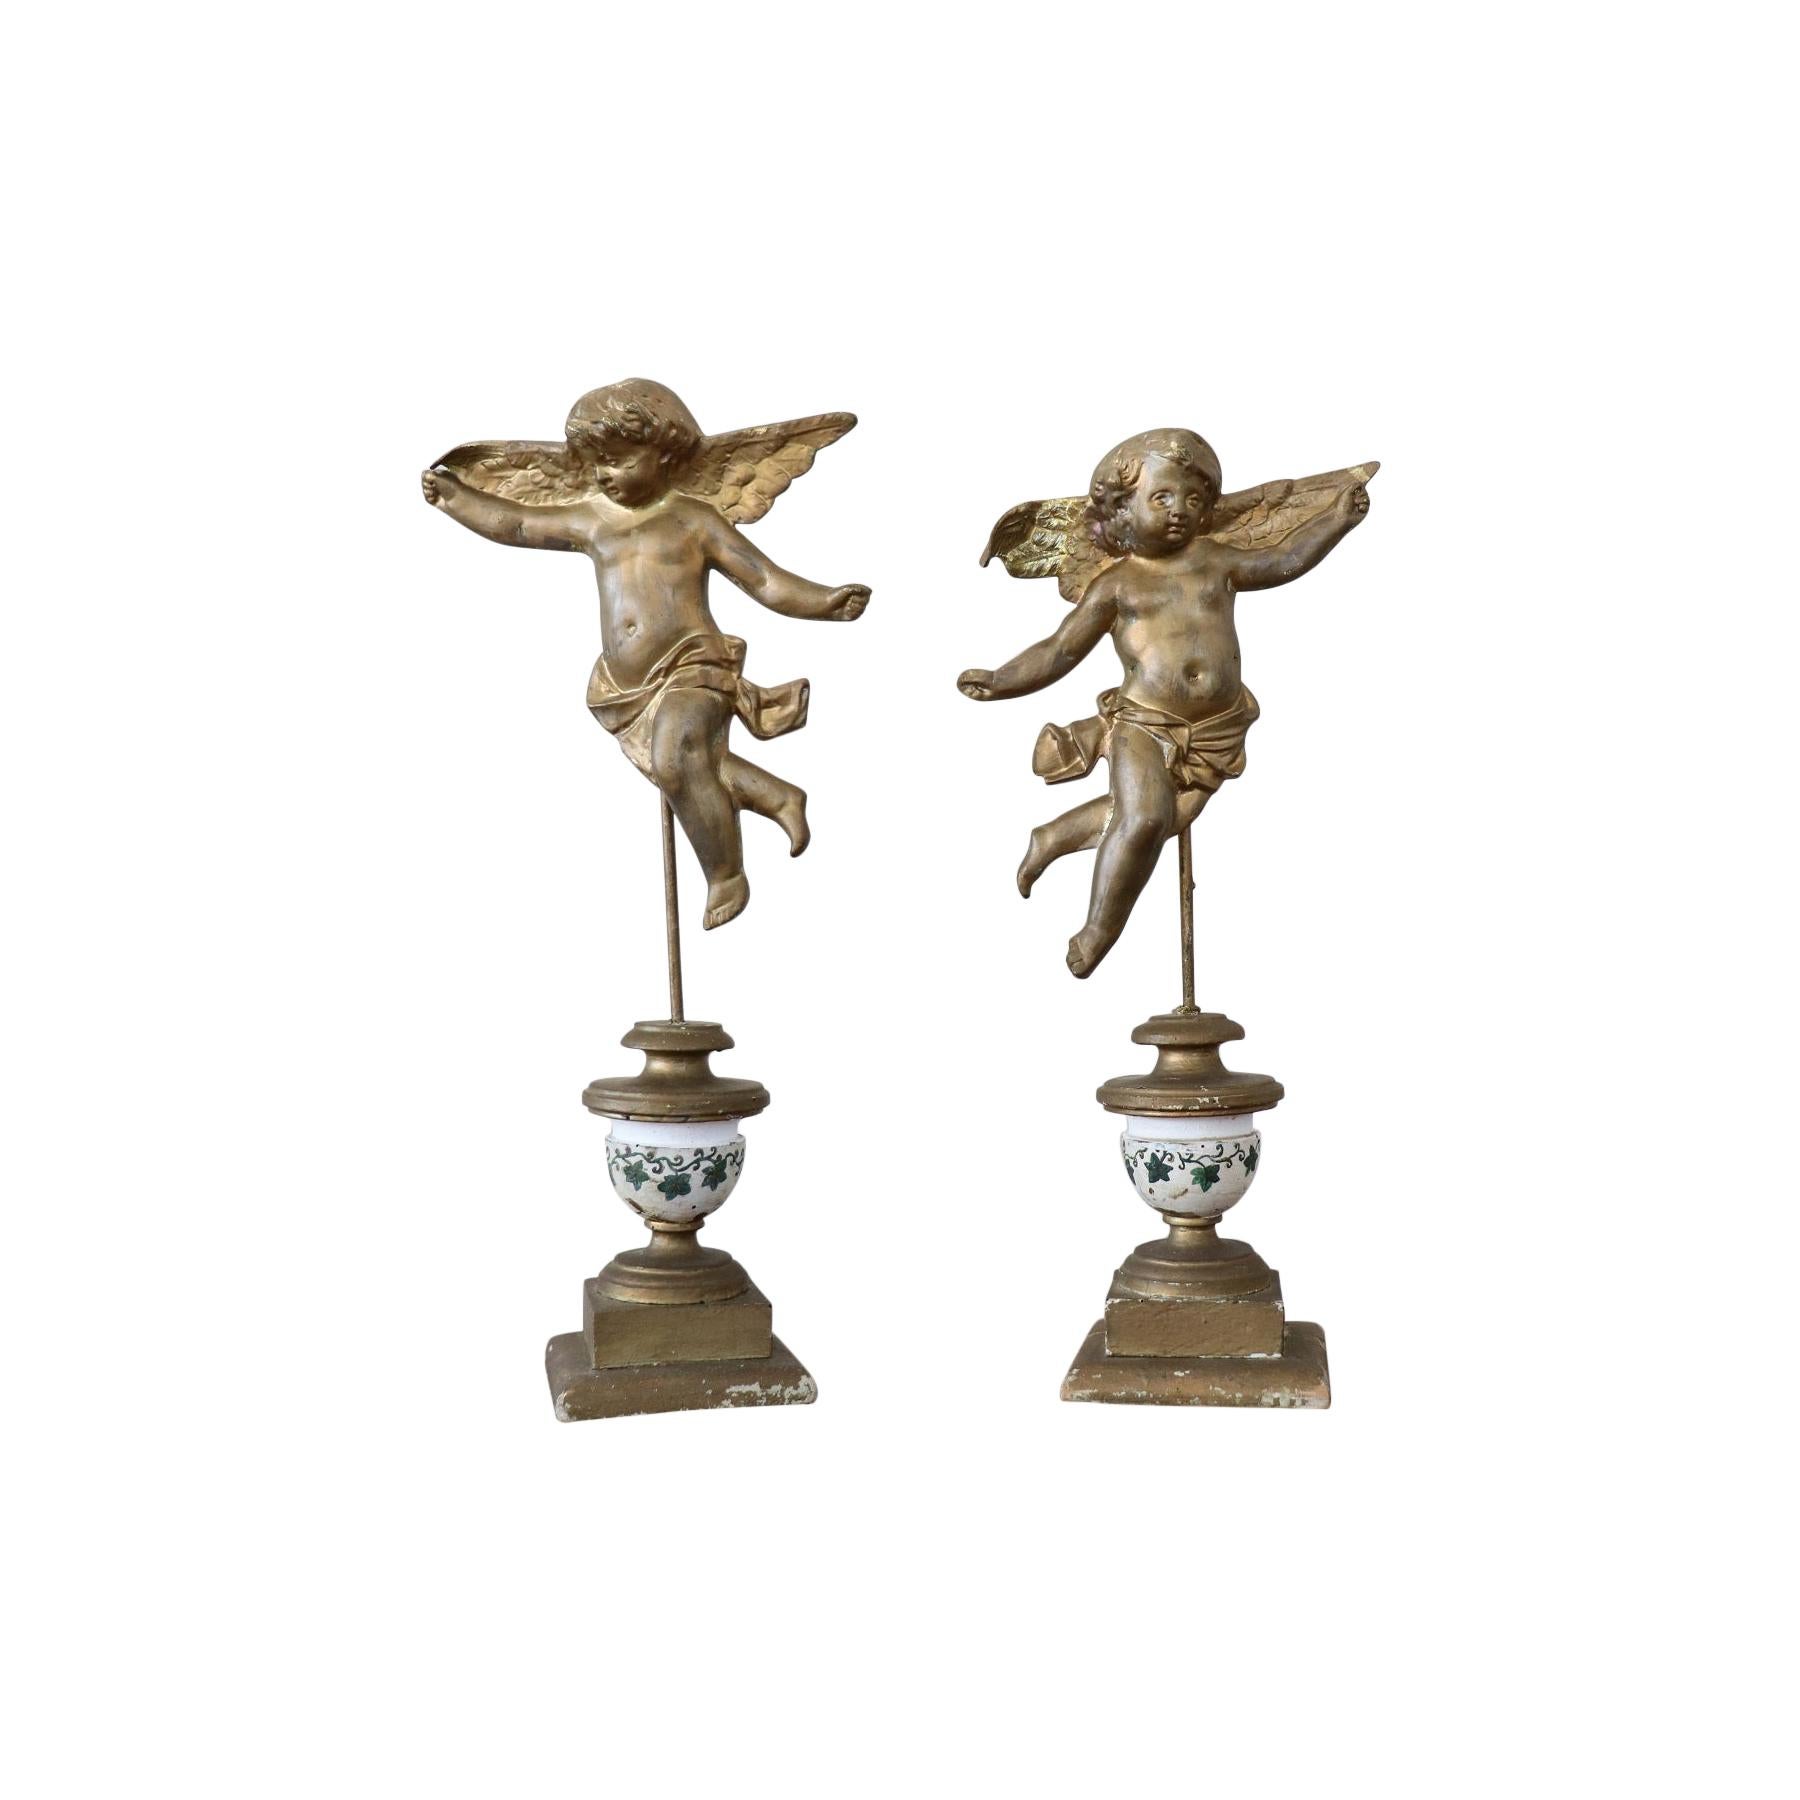 19th Century Italian Pair of Gilded Bronze Angels on a Wooden Base